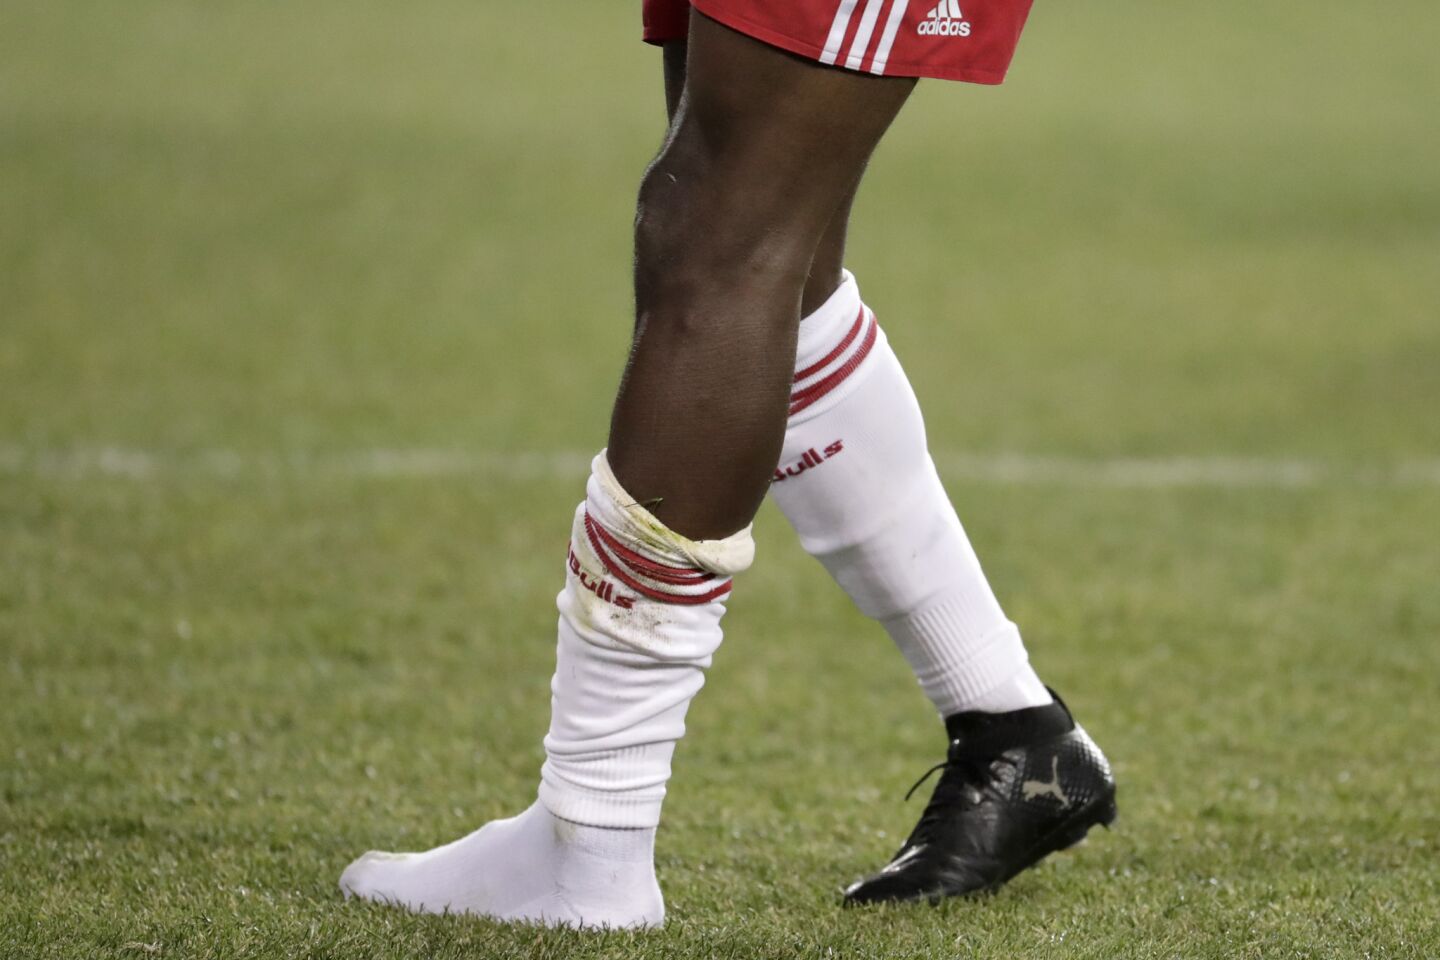 New York Red Bulls forward Bradley Wright-Phillips loses a boot while competing against Guadalajara during the first half of the second leg of a CONCACAF Champions League soccer semifinal. Tuesday, April 10, 2018, in Harrison, N.J. (AP Photo/Julio Cortez)